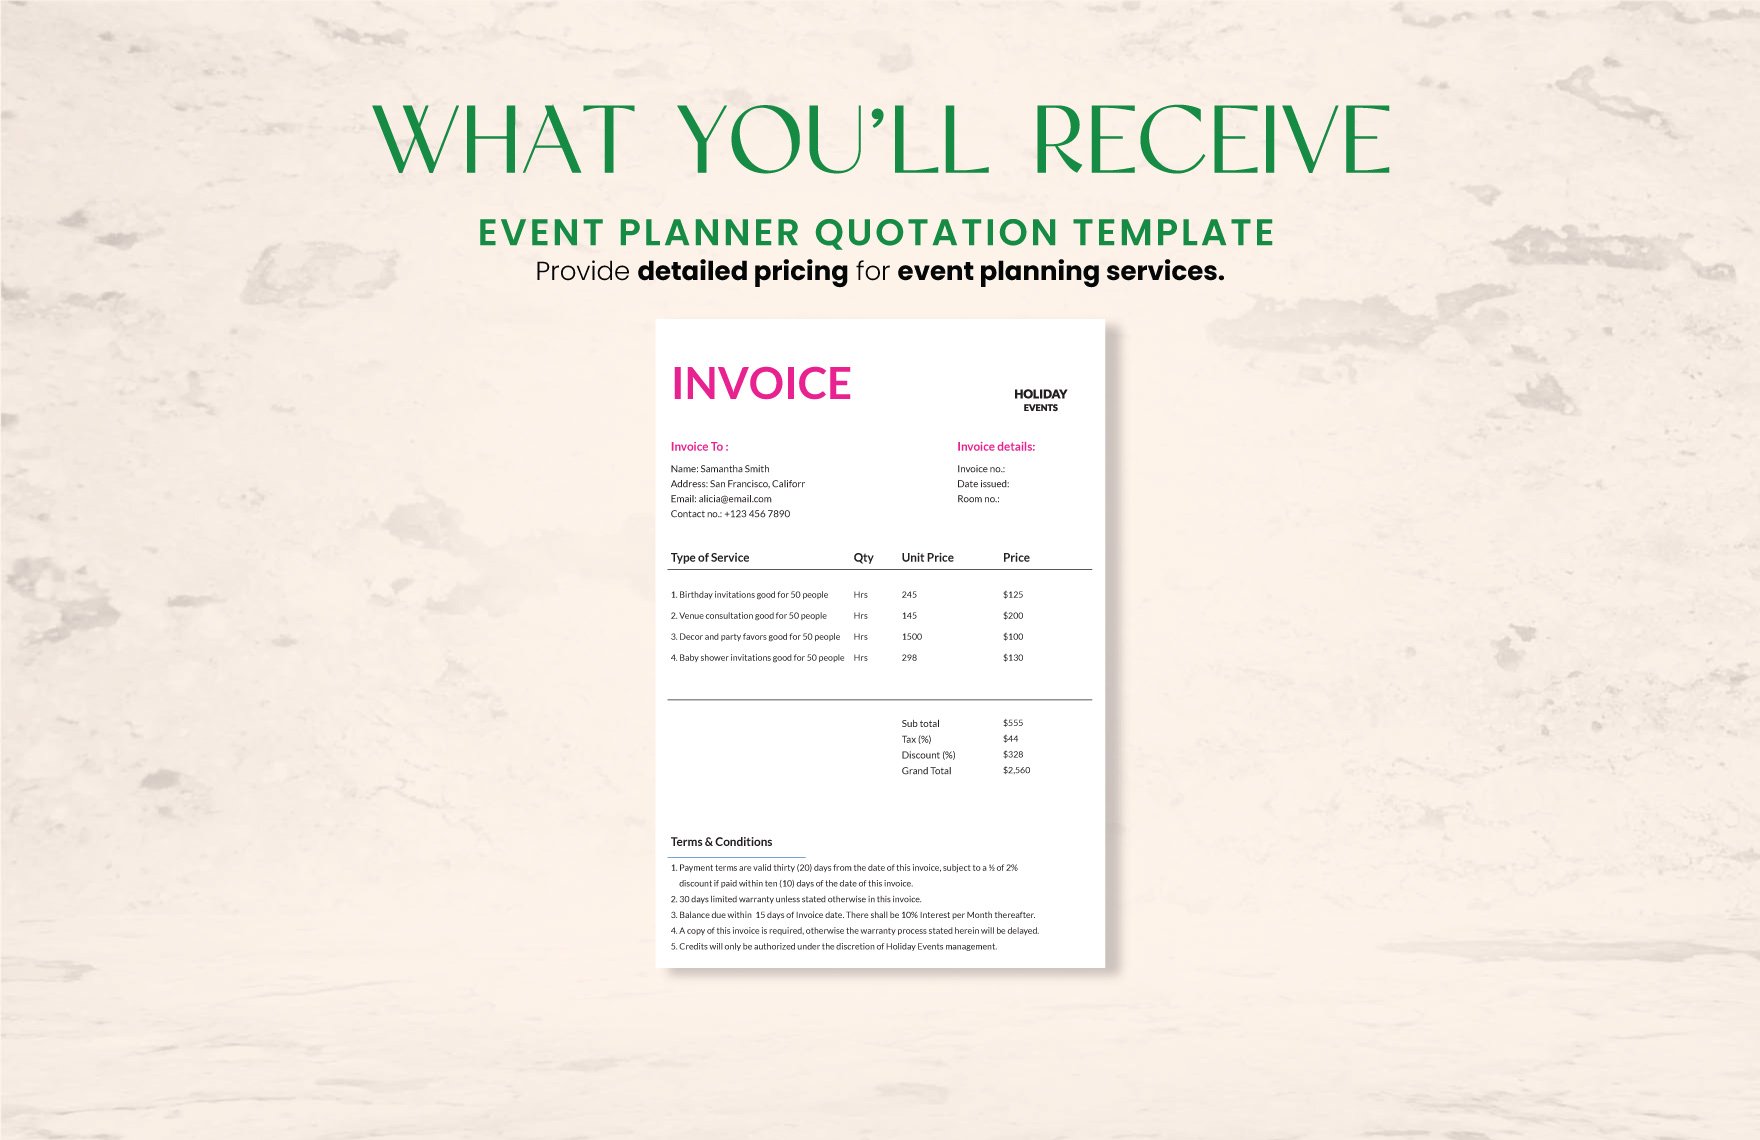 Event Planner Quotation Template